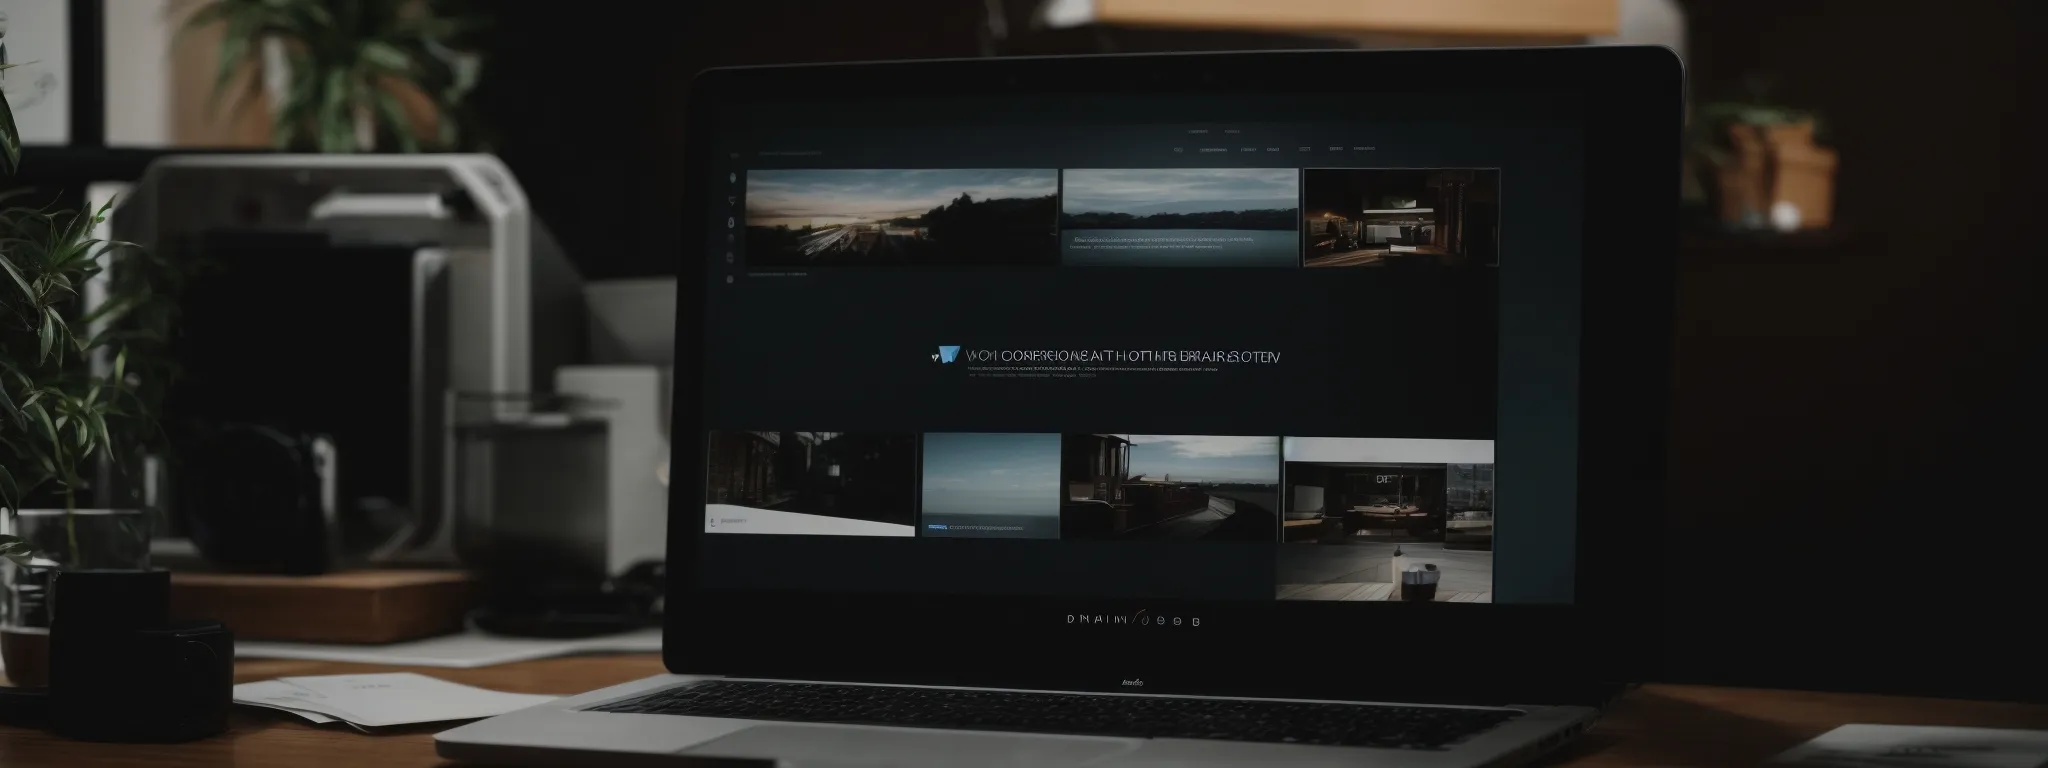 a desktop with an open laptop displaying a website interface for a photography portfolio.